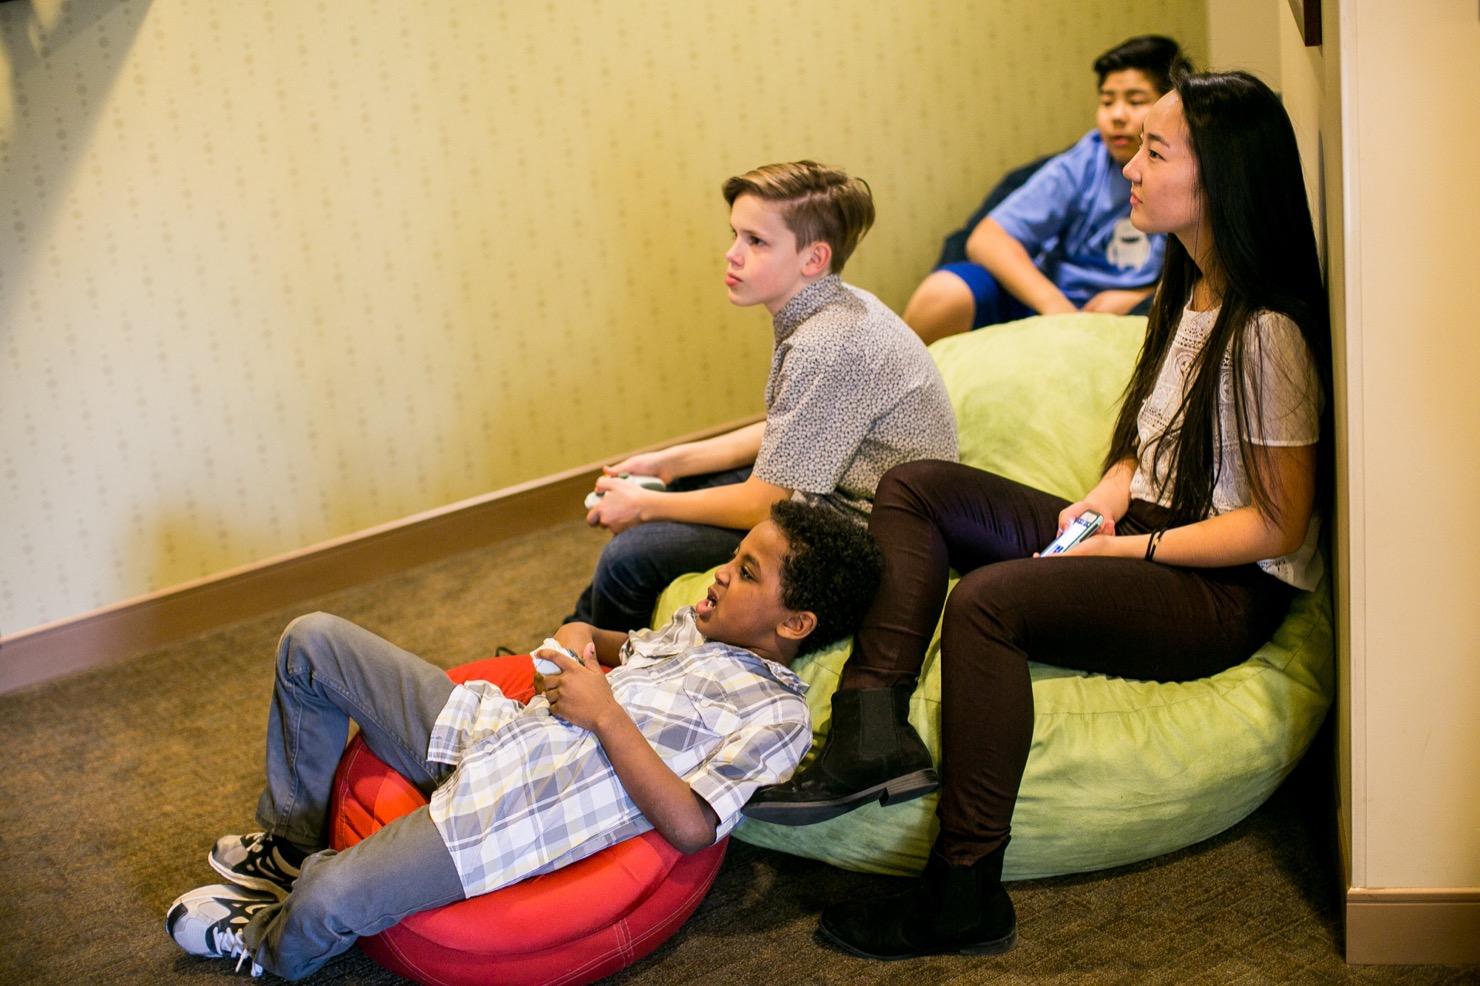 Roos Orthodontics' patients playing video games